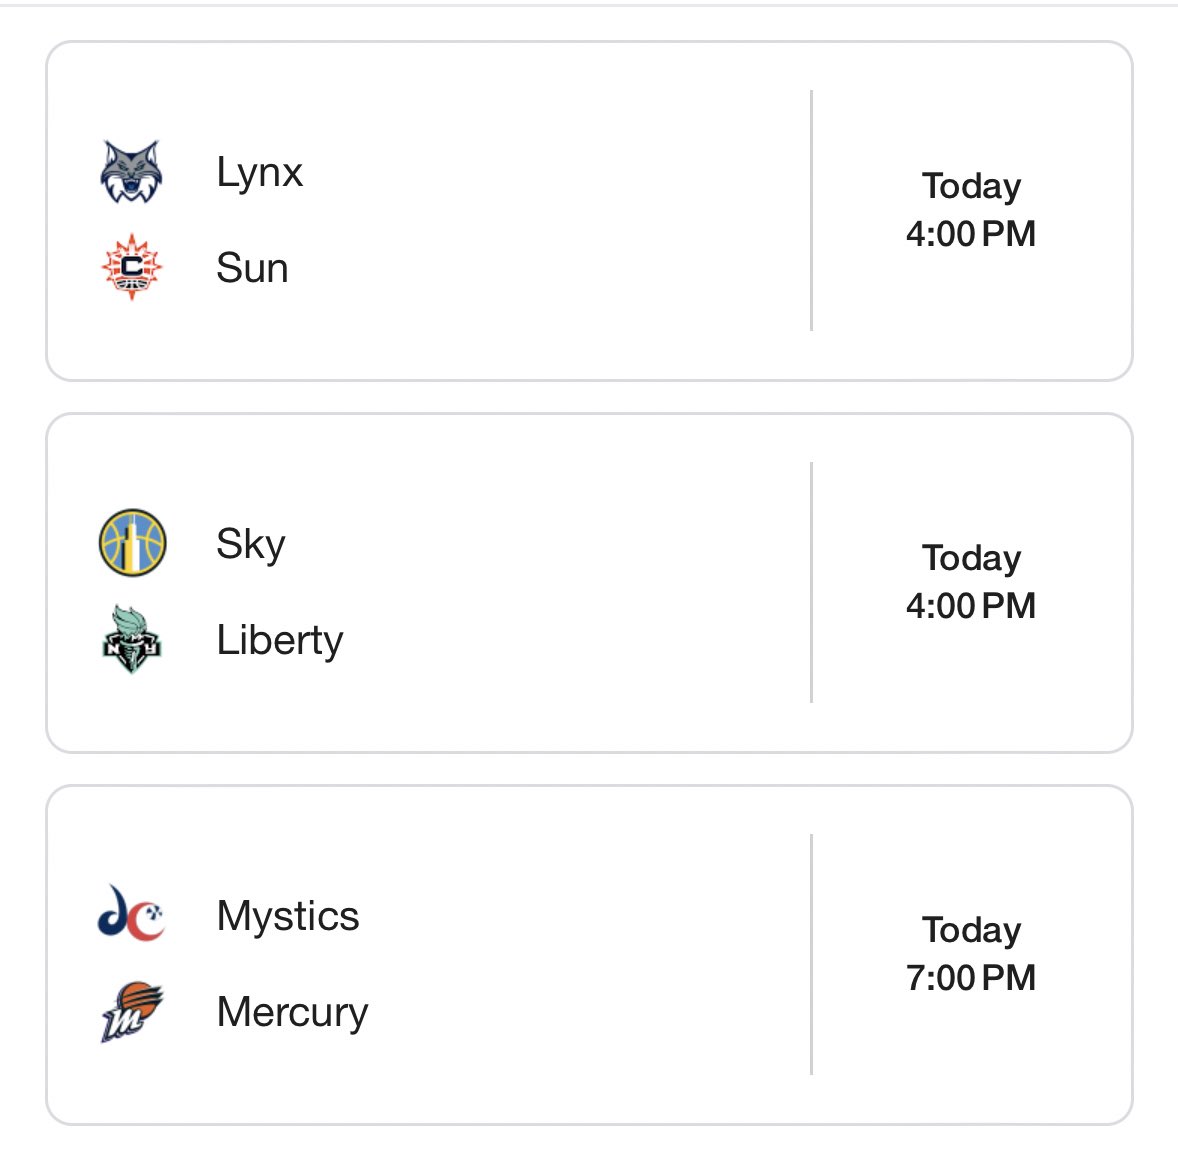 Busy day today — which game are you most excited to watch?